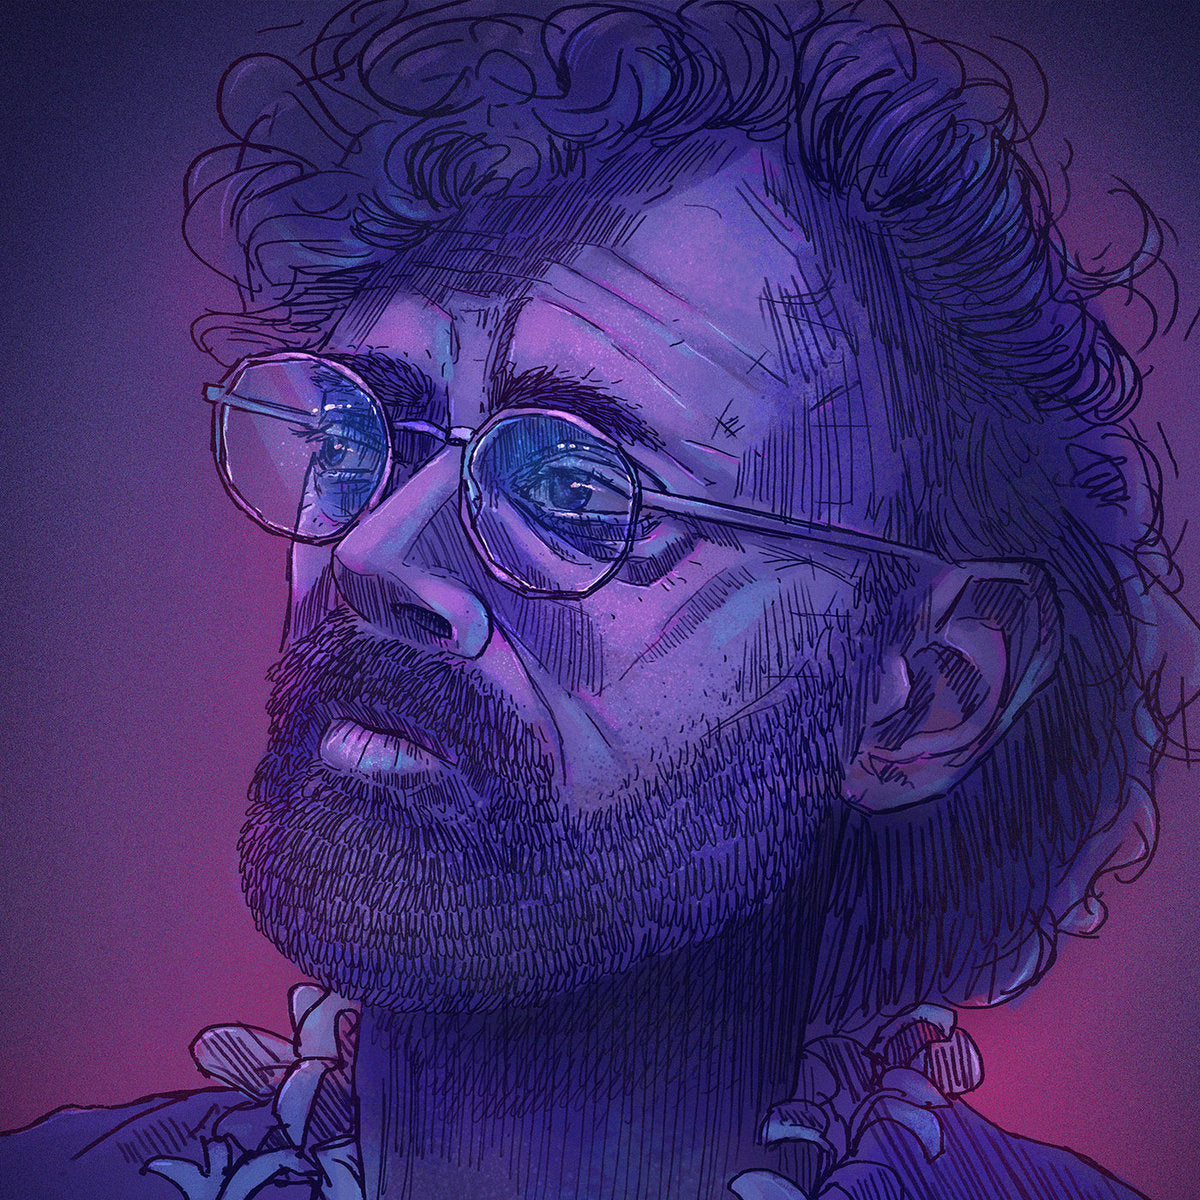 How to Make Money Out of Saving the World (ft. Terence McKenna)